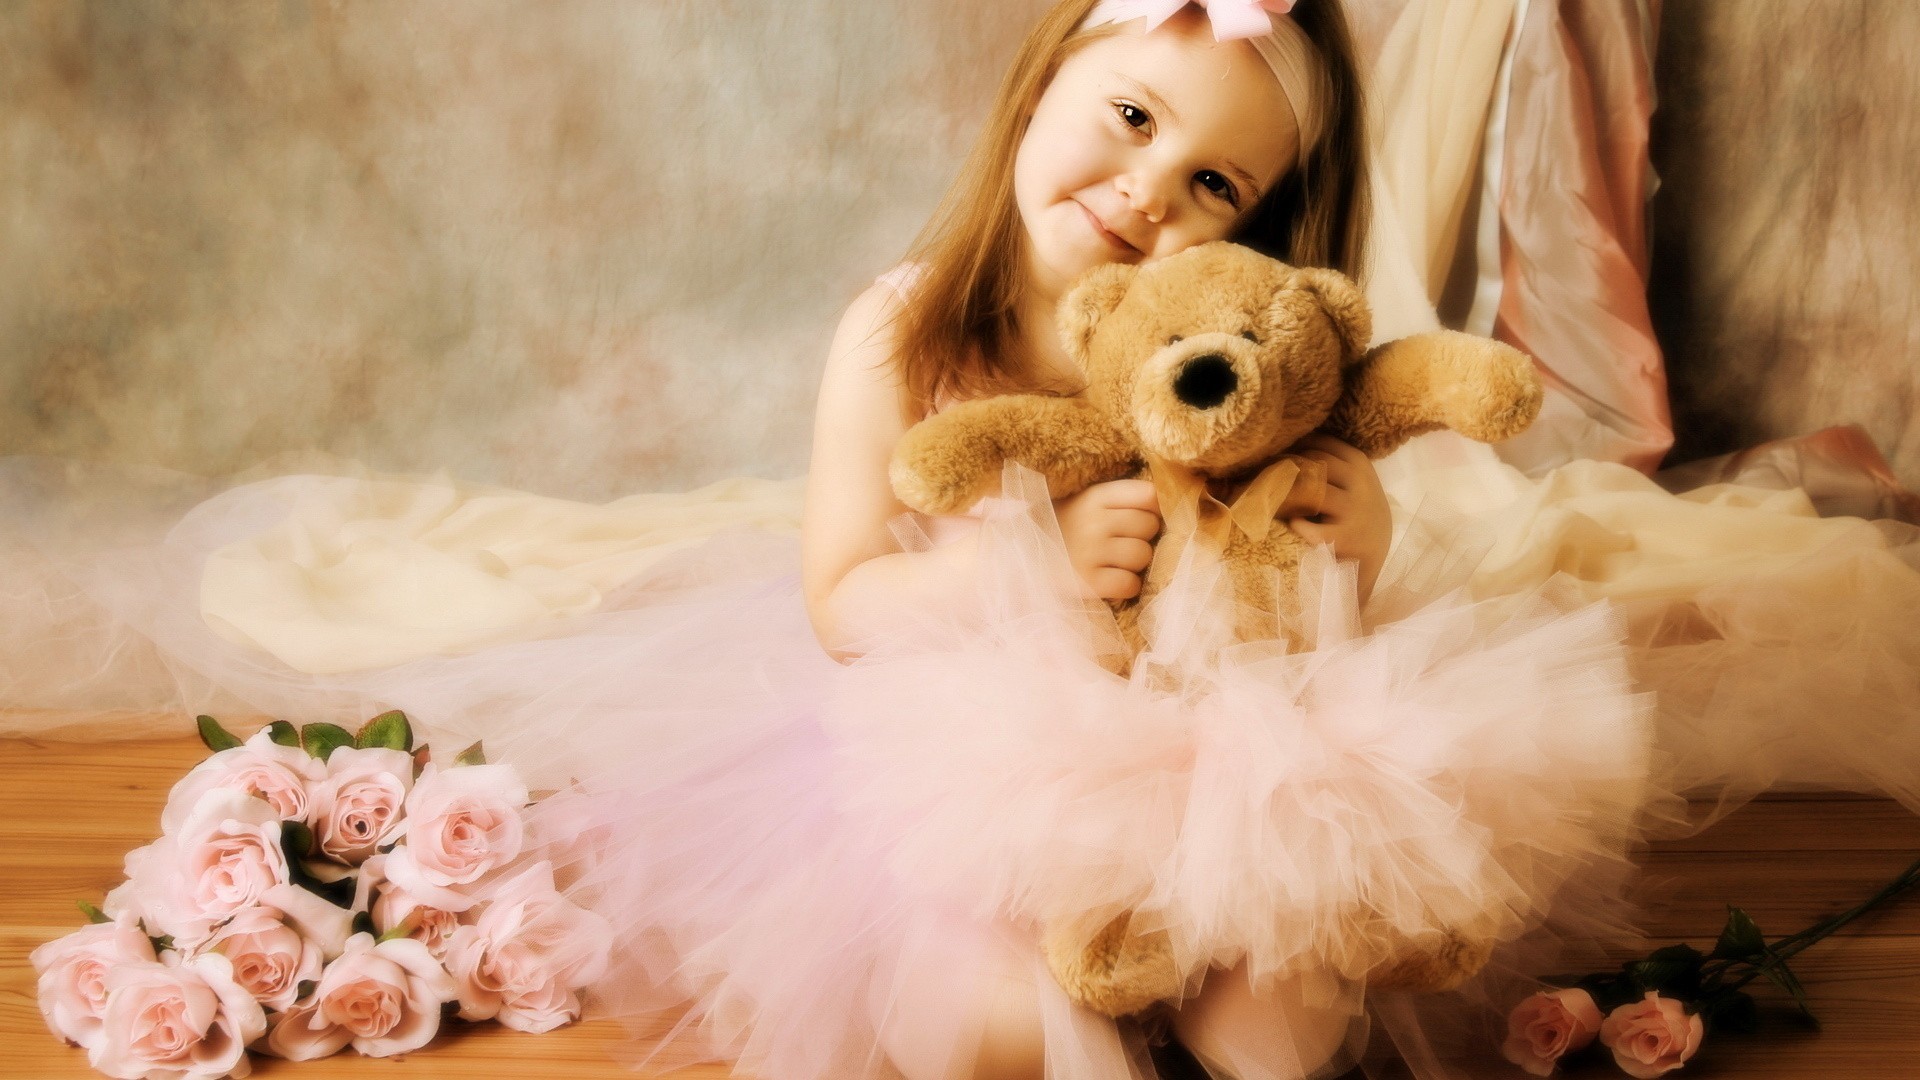 Image World Cute Teddy Bear Beautiful Collection Pictures 1920 1080 Taddy Bear Image Wallpapers 1920x1080